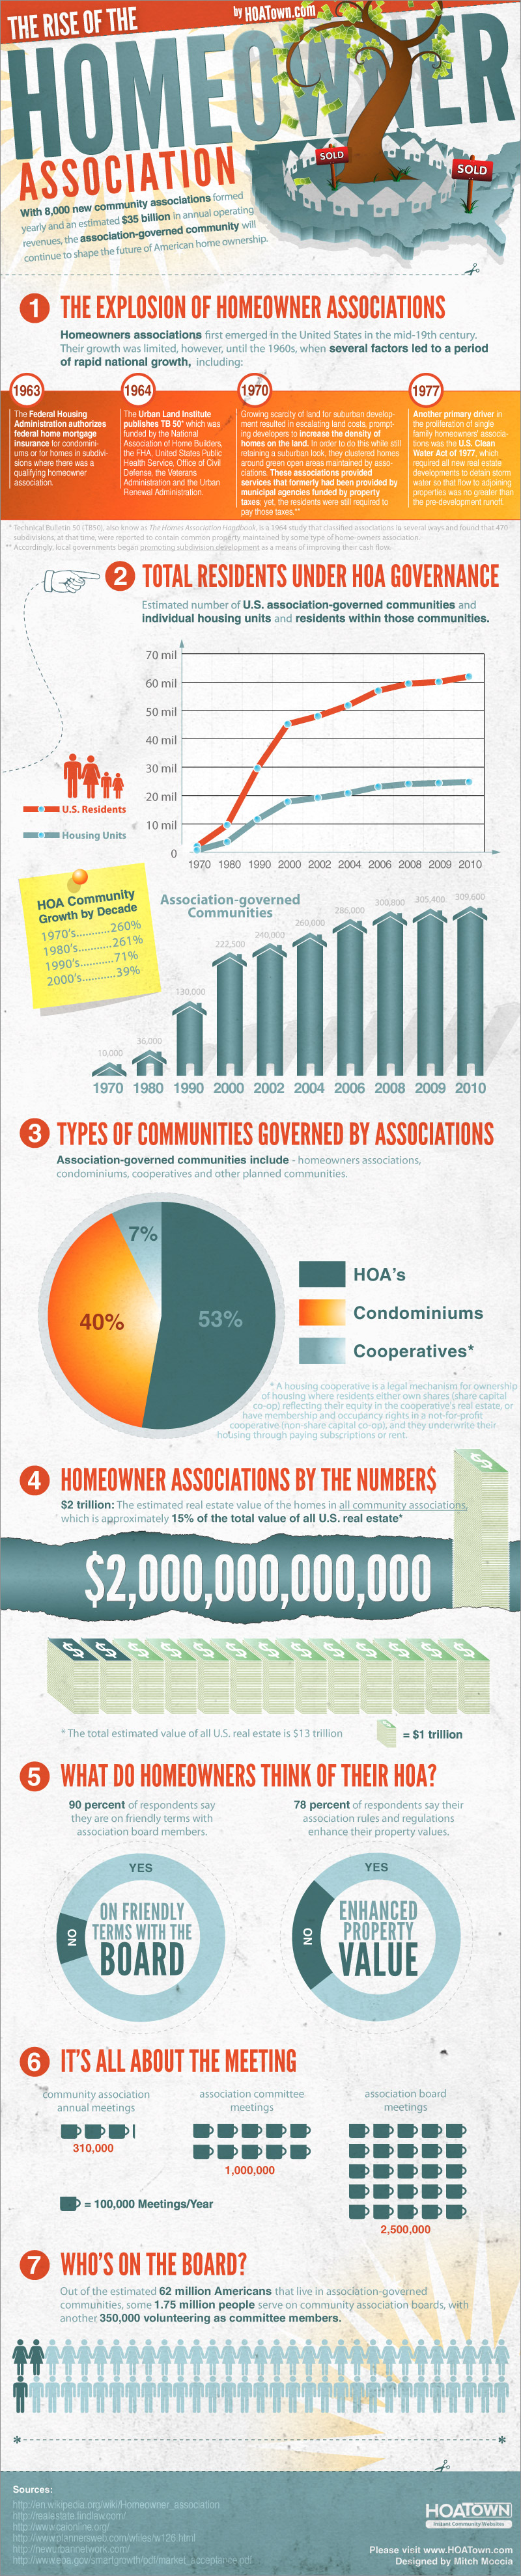 The Rise of the Homeowner Association | Visual.ly